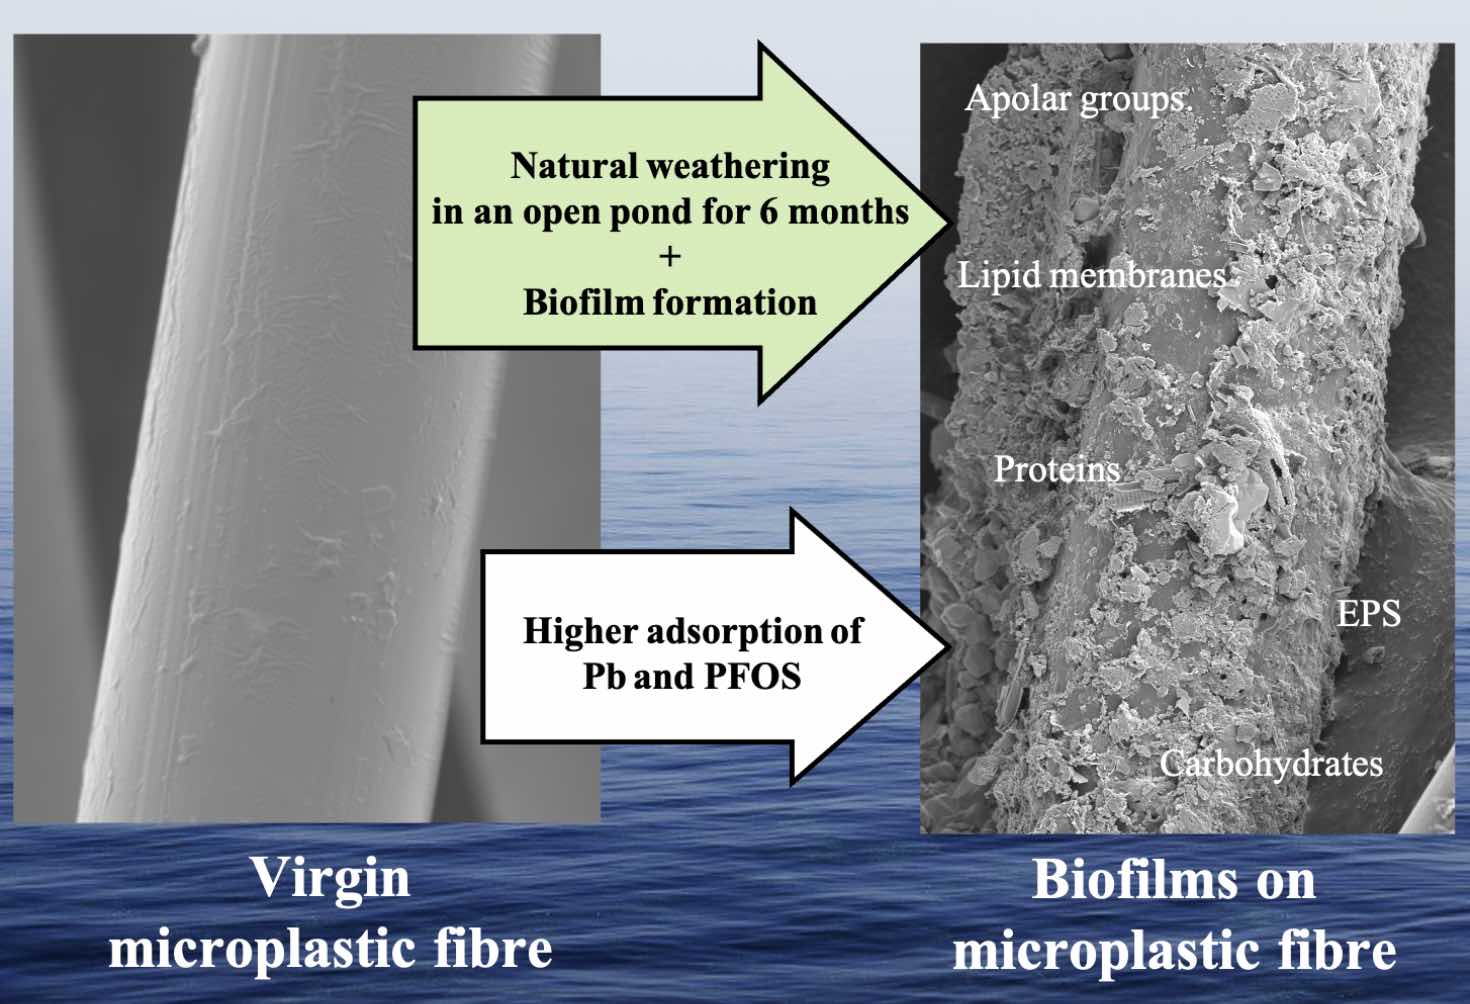 Graphic of effect of biofilms on microplastic fibre degrading after 6 months